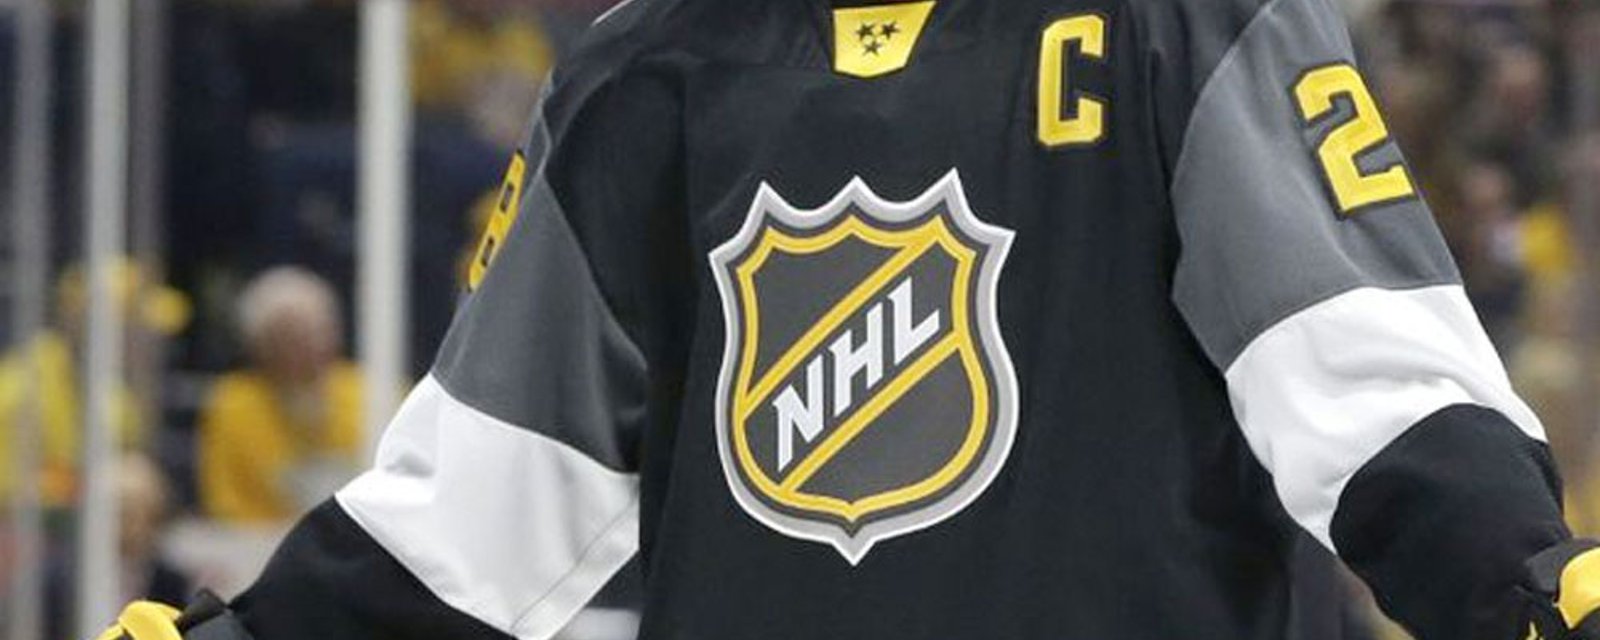 NHL captain announces he’s “taking a break” from hockey